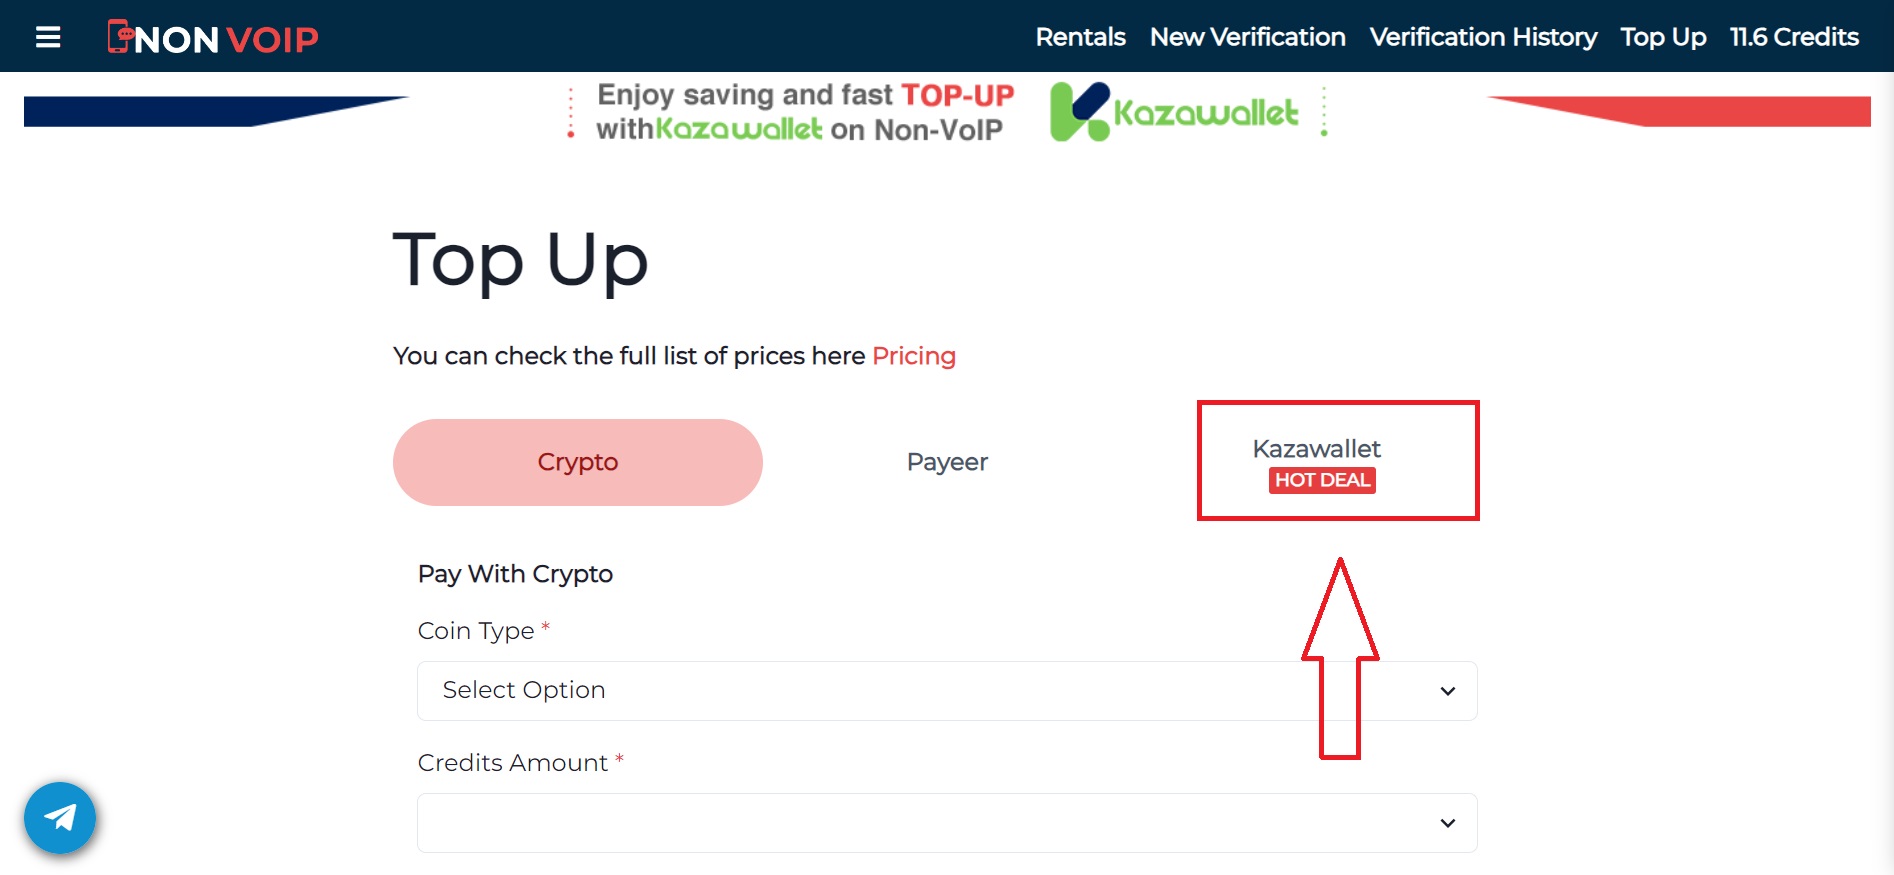 Steps to Top Up Your Non-VoIP Account Using Kazawallet